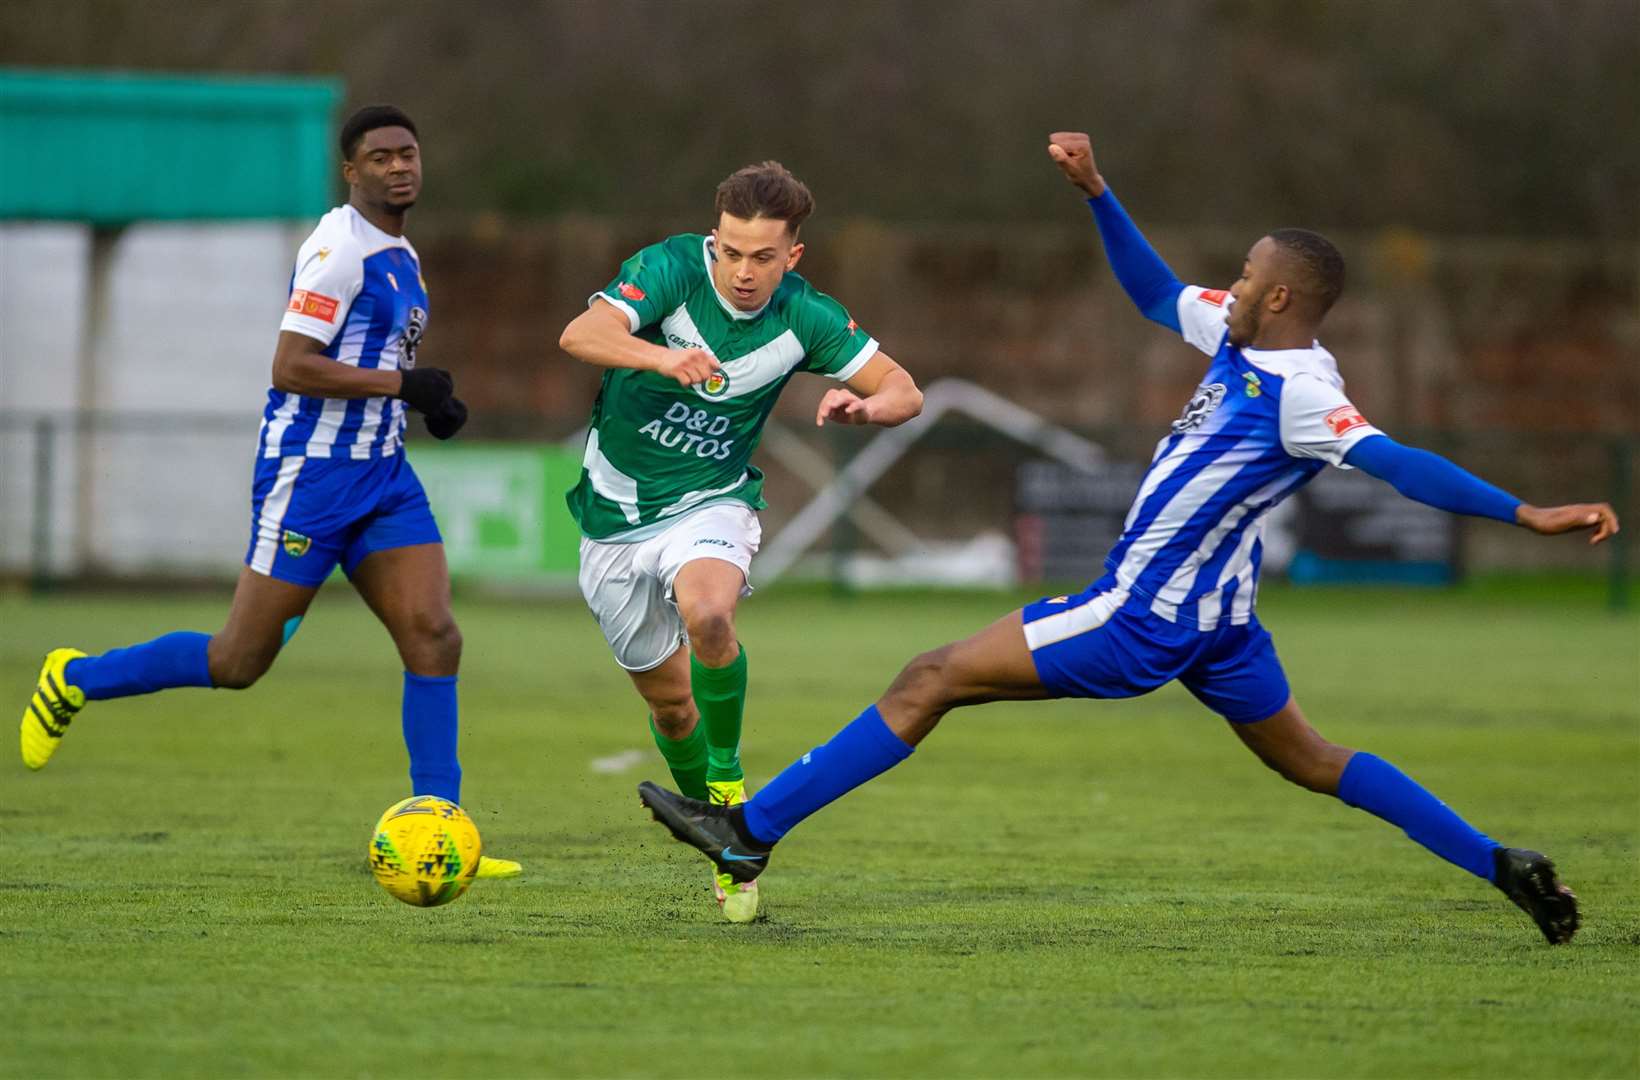 Johan ter Horst skips a challenge during Ashford's win over VCD Picture: Ian Scammell